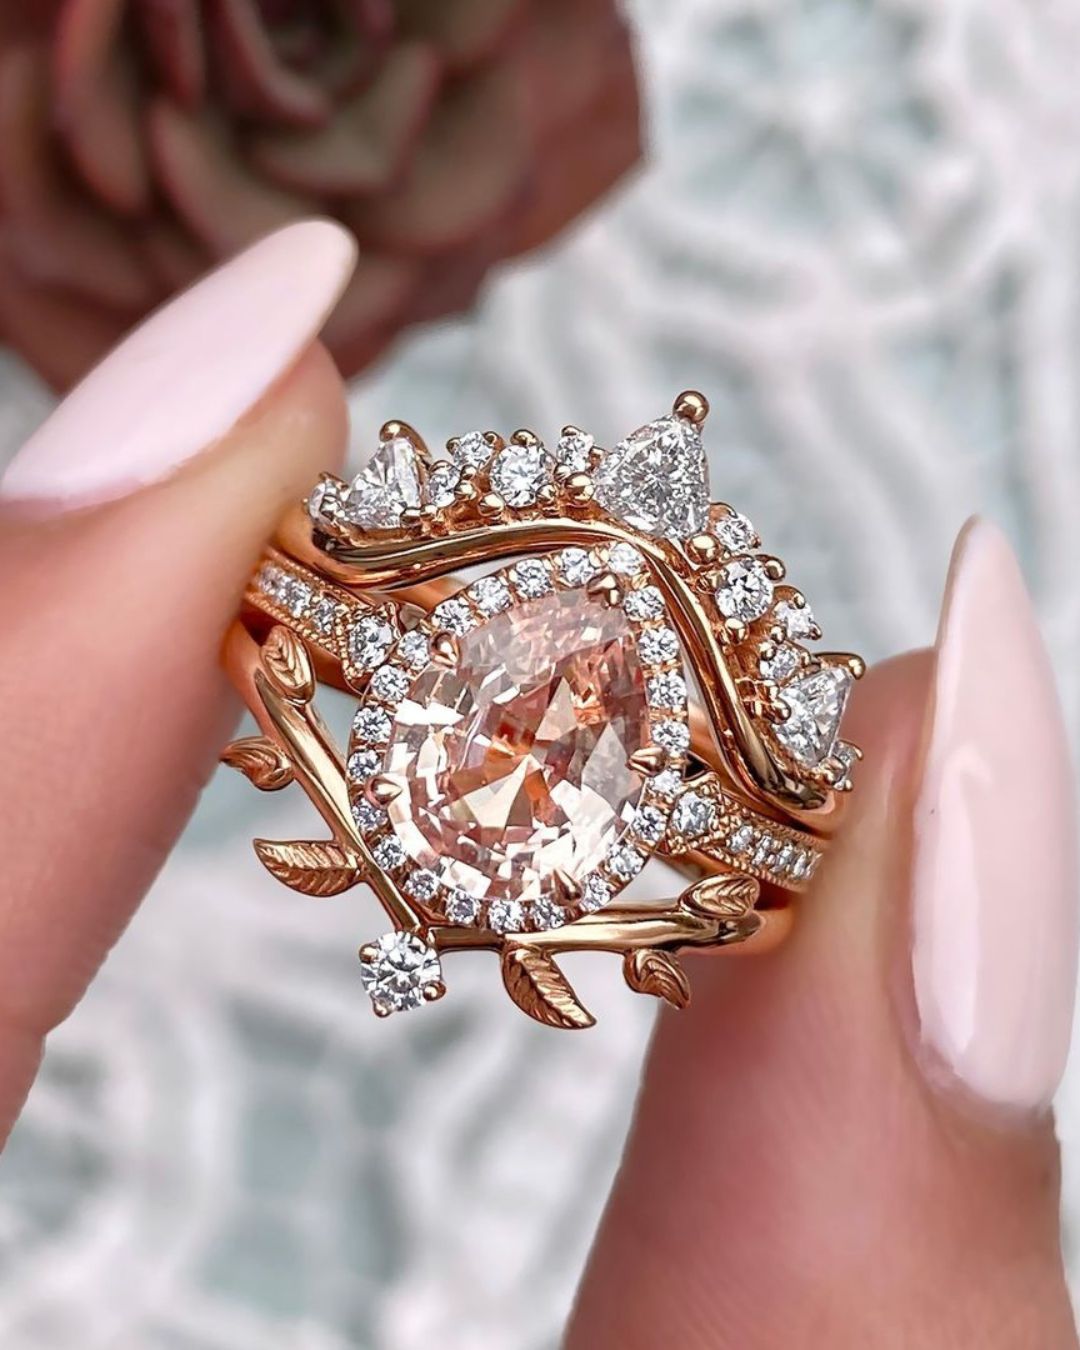 morganite engagement rings with amazing details